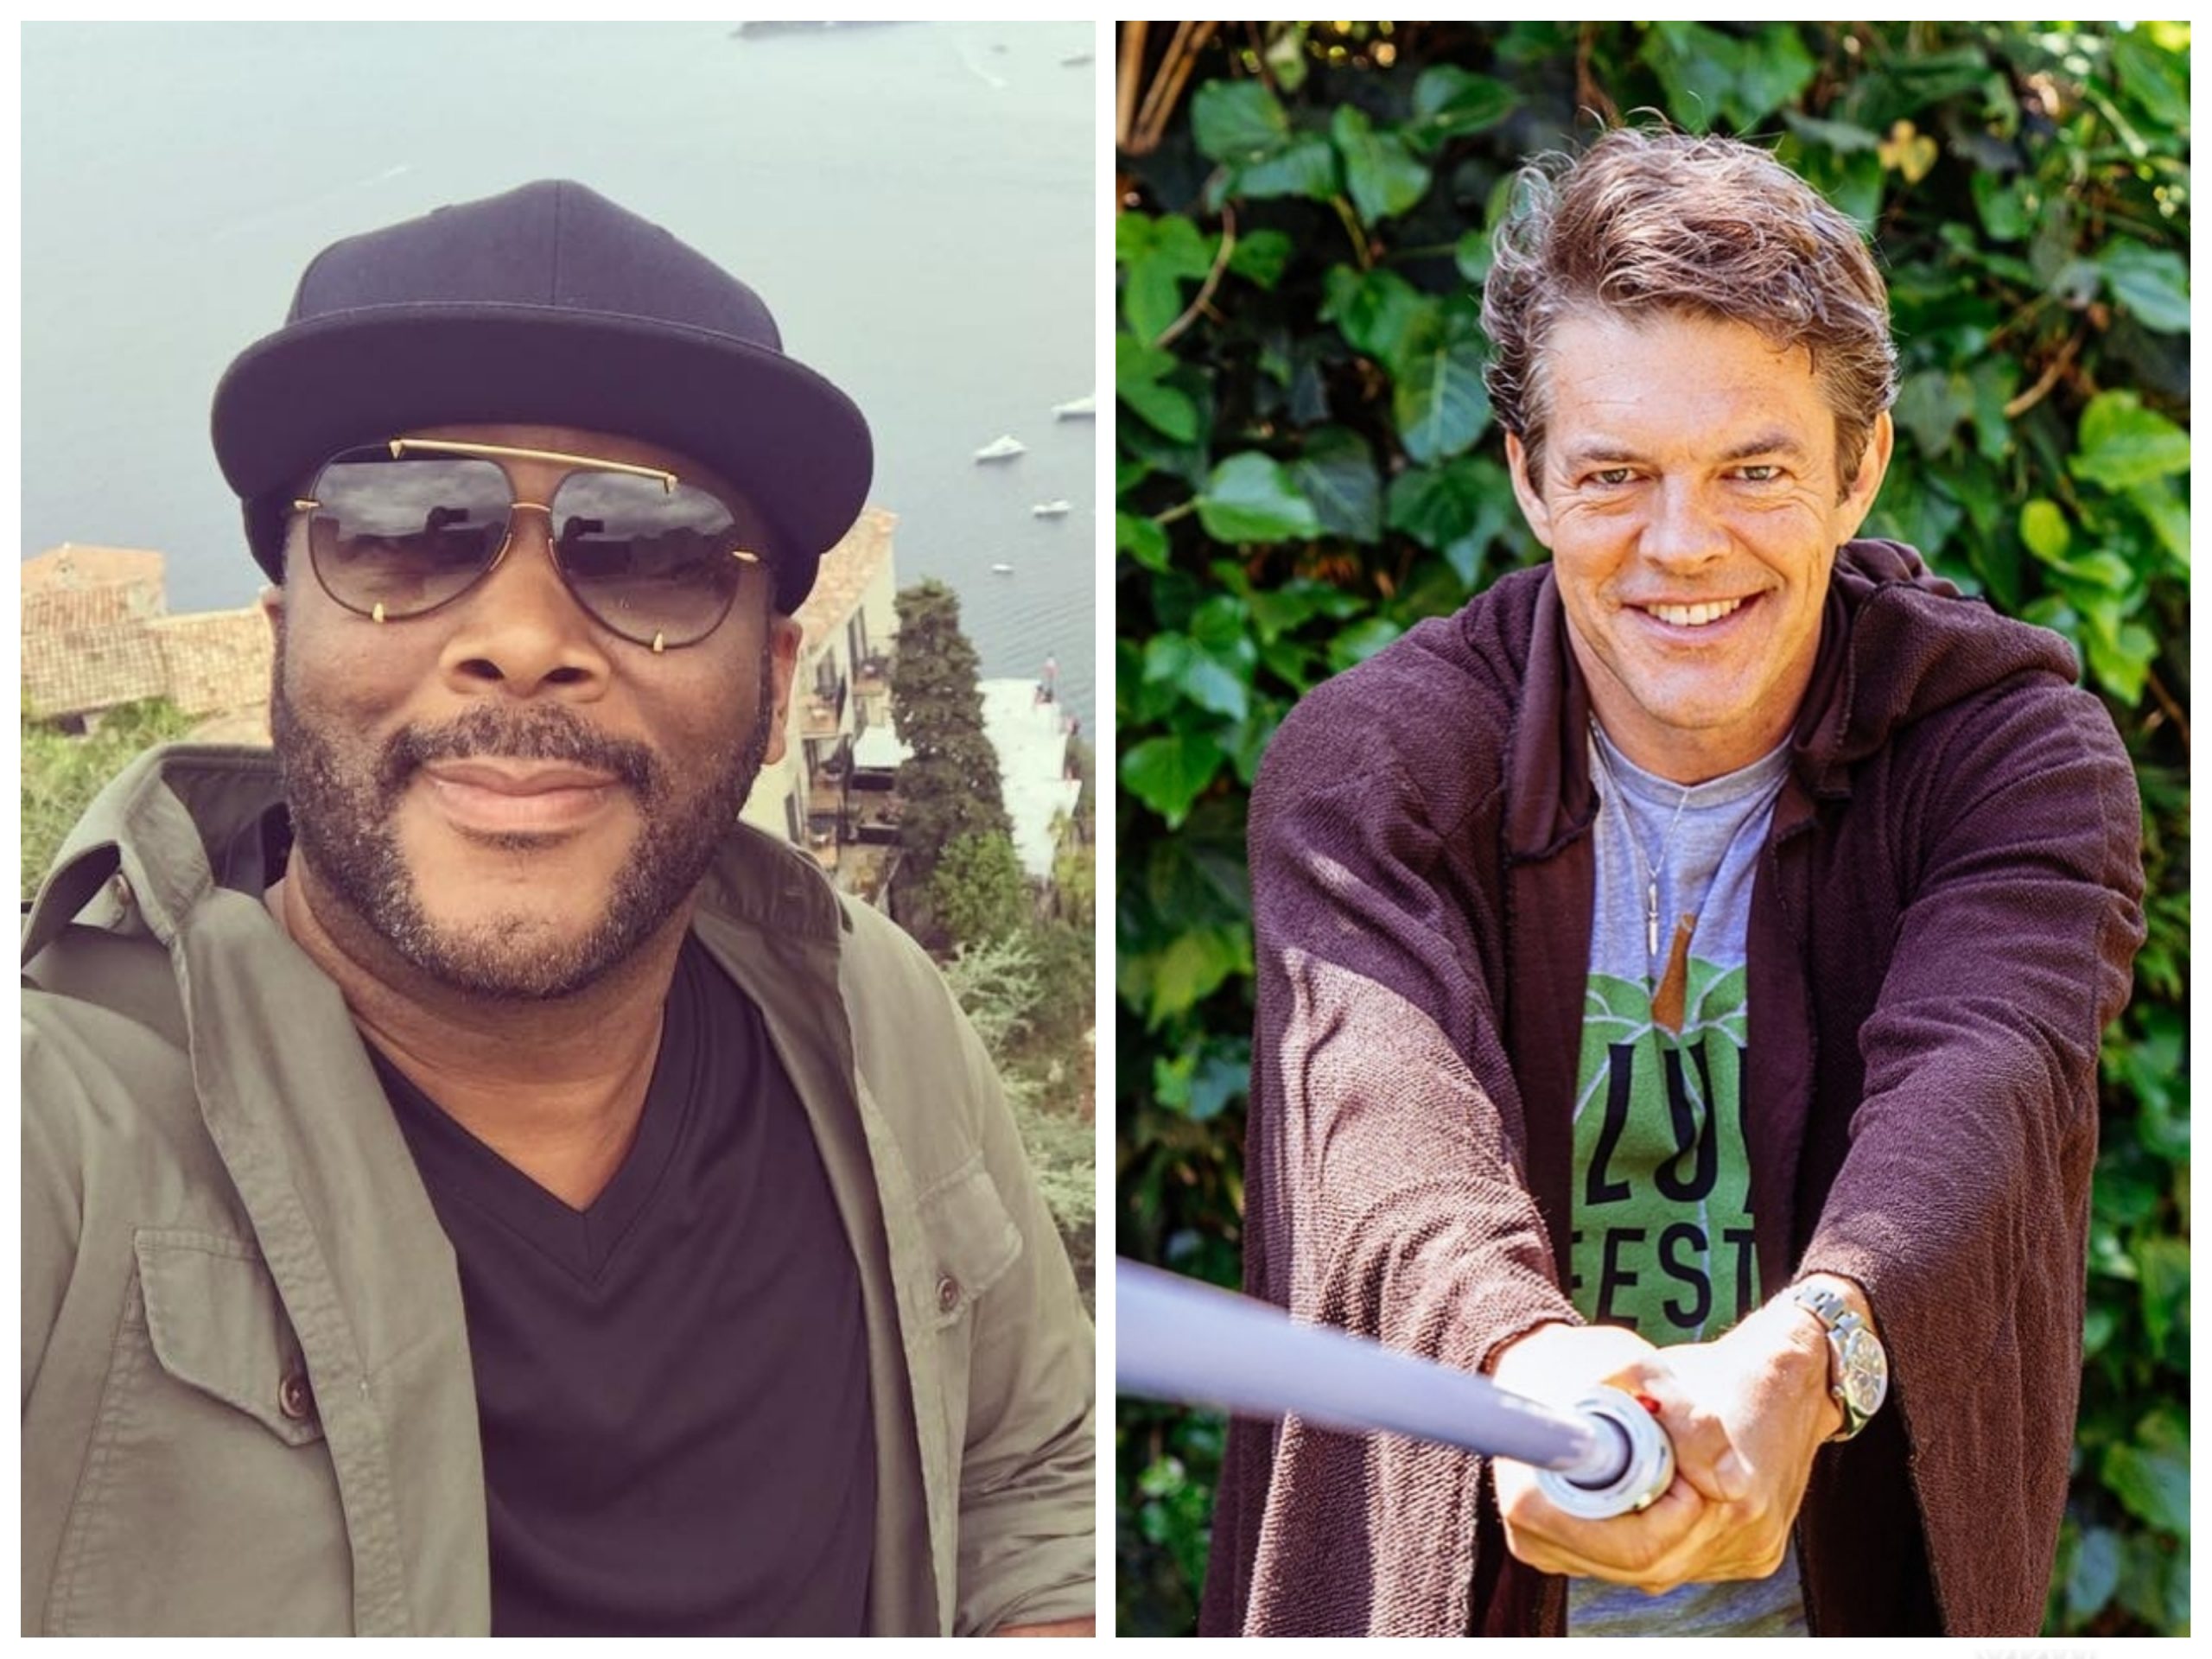 Tyler Perry And Jason Blum Team Up For Thriller “Help”